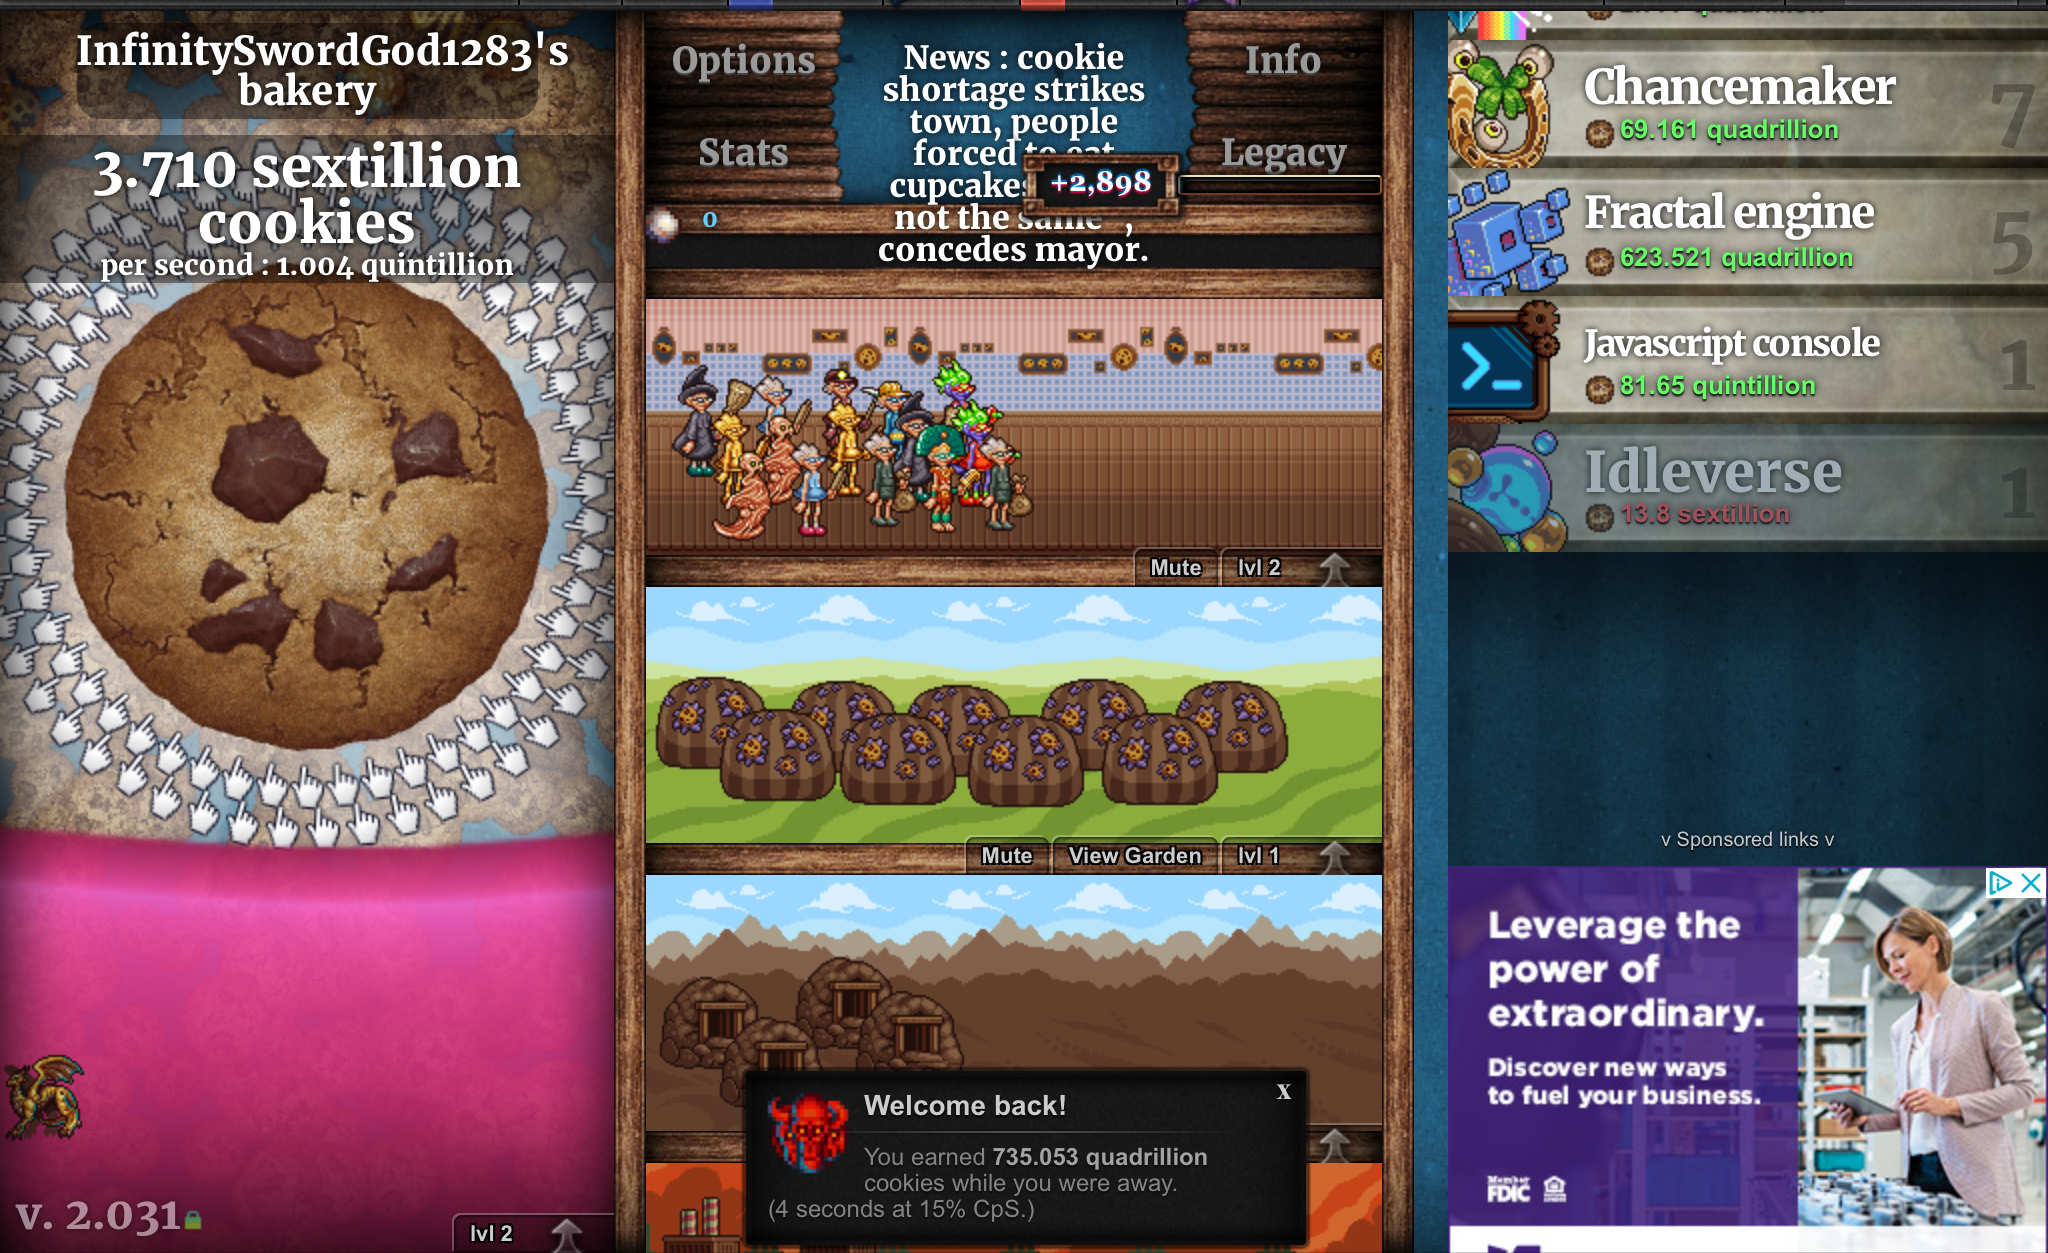 Cookie Clicker, Part 1 of trying to get 10 JavaScript Consoles